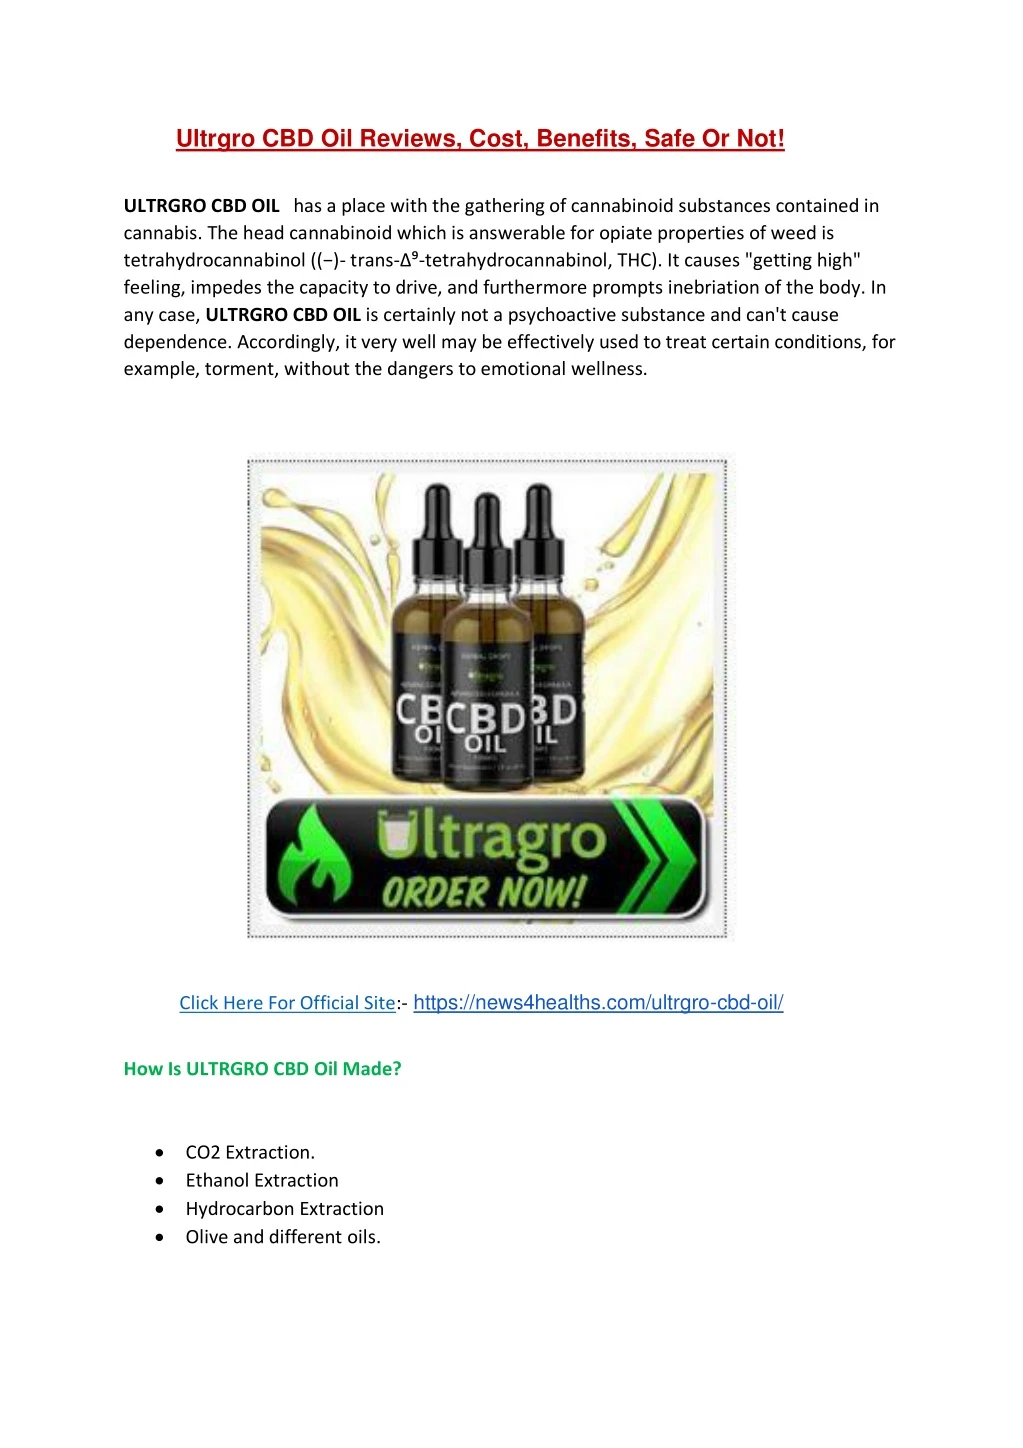 ultrgro cbd oil reviews cost benefits safe or not